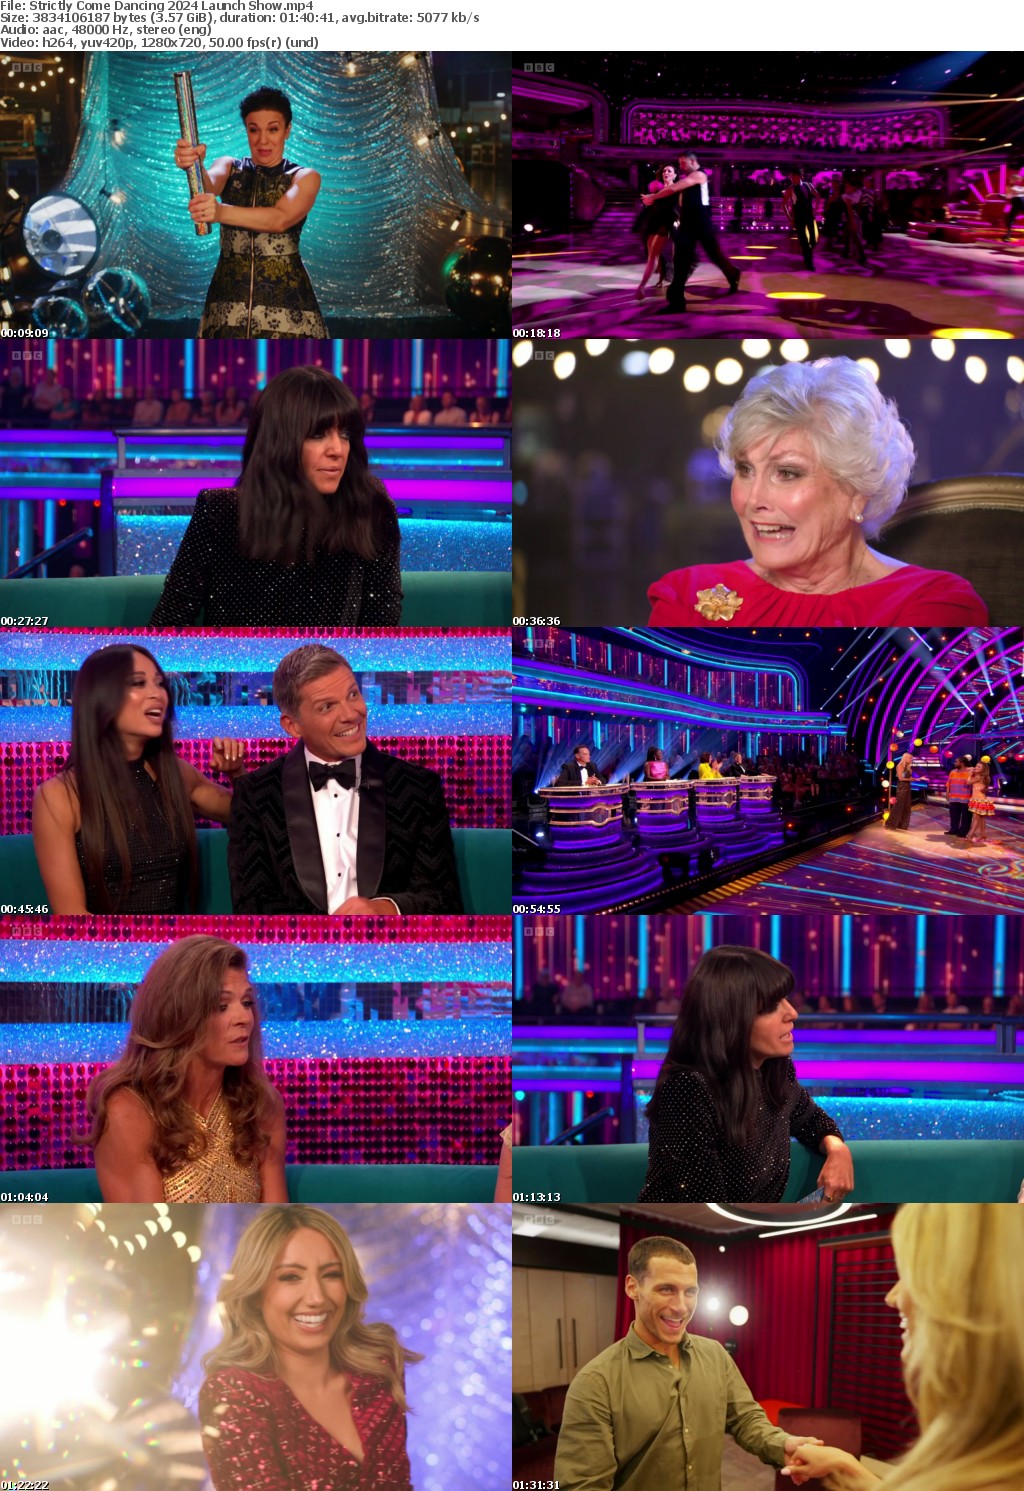 Strictly Come Dancing 2024 Launch Show (1280x720p HD, 50fps, soft Eng subs)